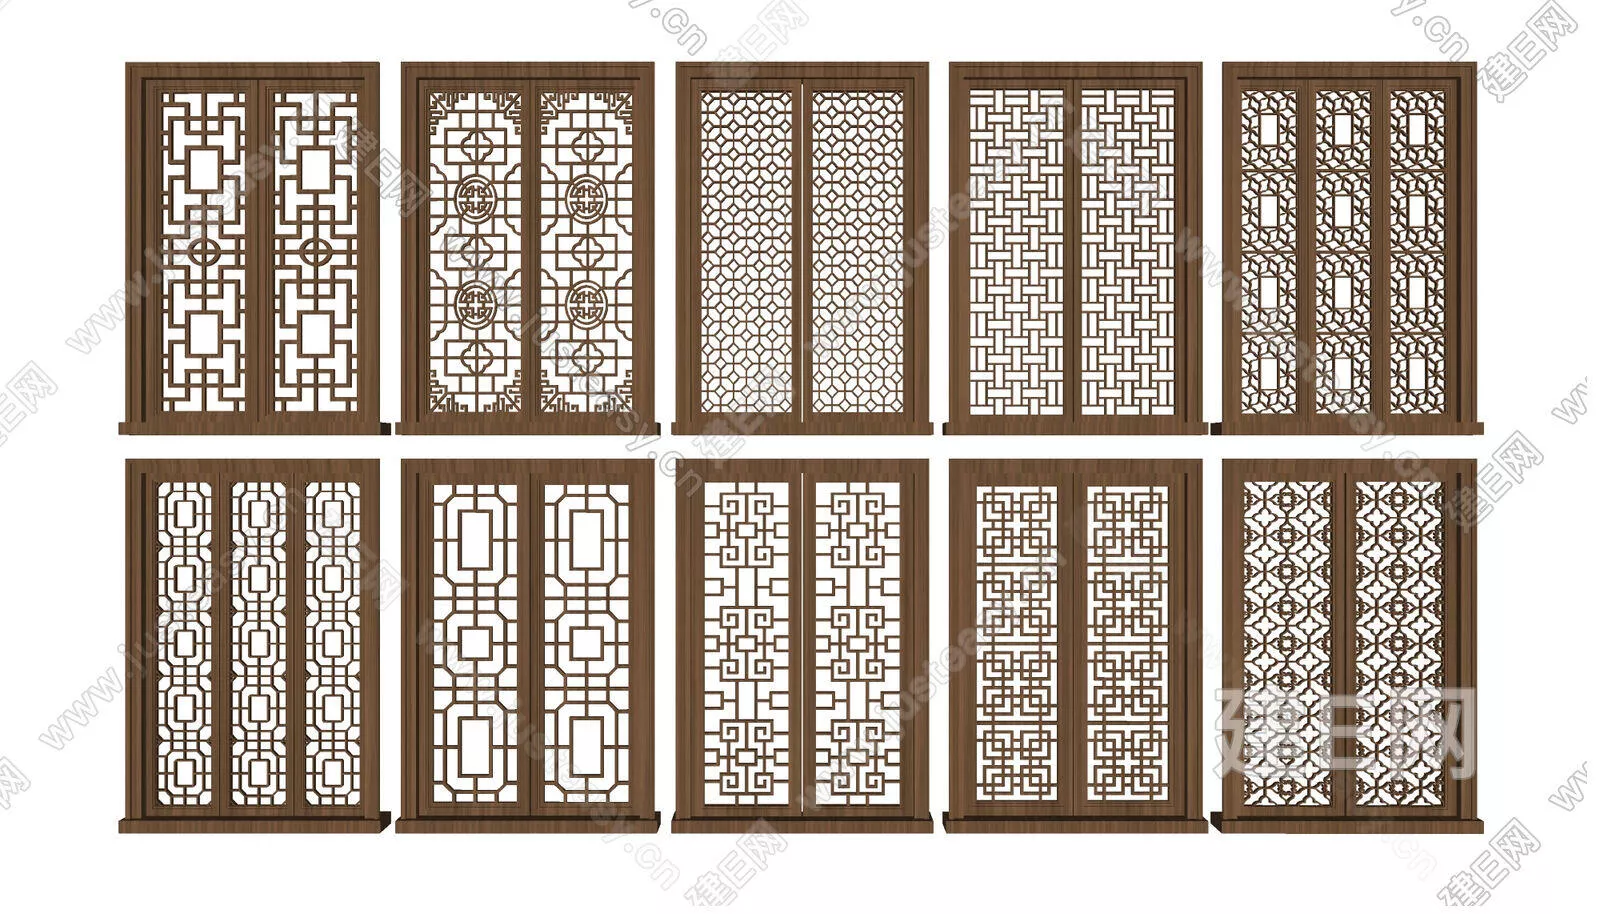 CHINESE PARTITION SCREEN - SKETCHUP 3D MODEL - ENSCAPE - 106250439